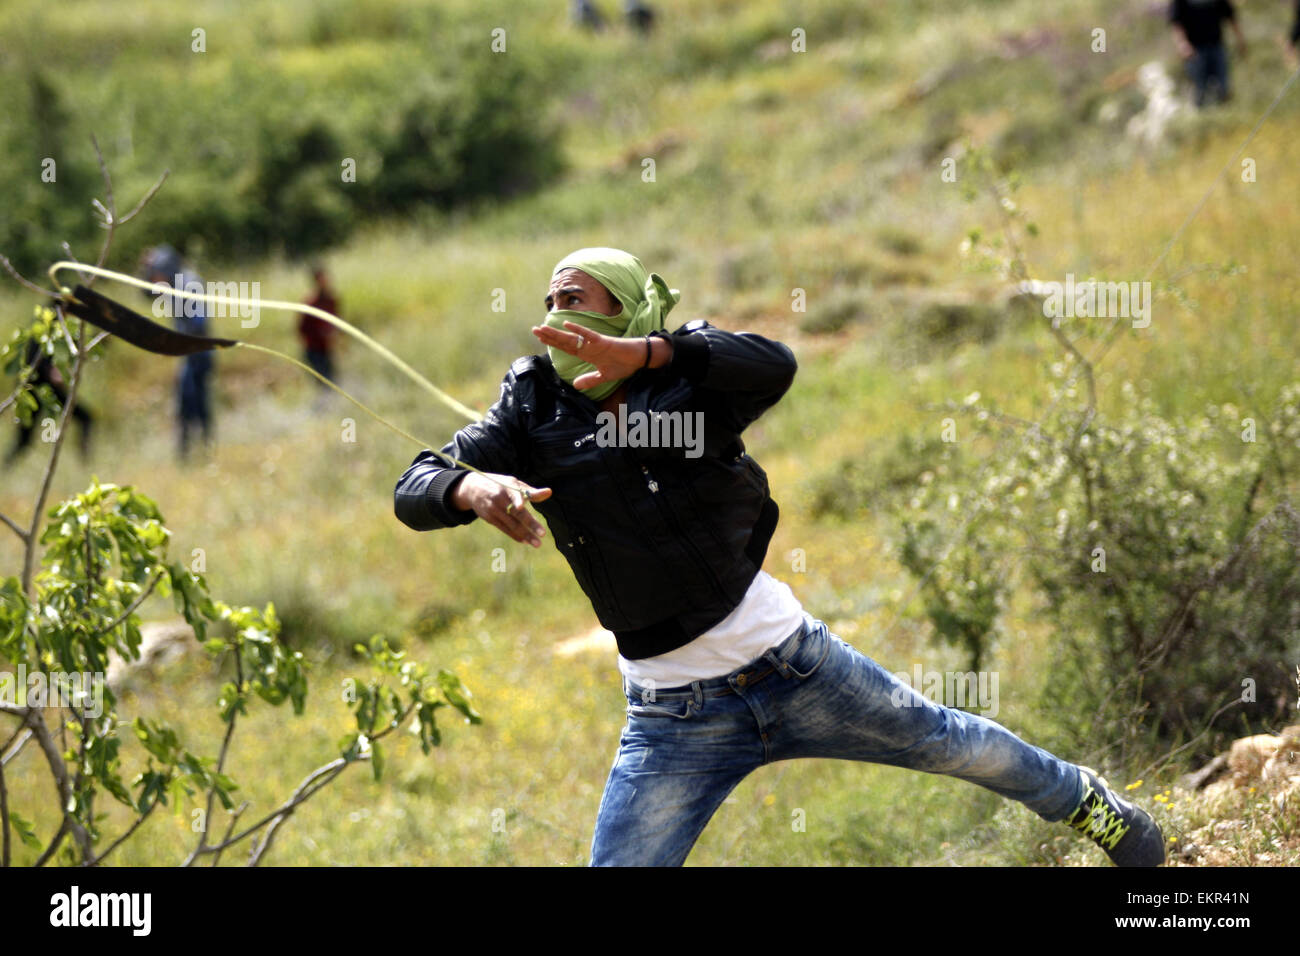 Sinjil, West Bank. 13th Apr, 2015. A Palestinian youth hurls stones towards Israeli security forces during clashes following the funeral of 27-year-old Palestinian Mohammed Jasser Karakra, in Sinjil village. Karakra stabbed two Israeli soldiers in the northern West Bank on April 8, 2015, wounding one seriously before being shot dead. It was the second knife attack in a week targeting Israeli soldiers and the latest in a wave of lone-wolf attacks which have been on the rise since last summer's 50-day war in the Gaza Strip. © Shadi Hatem/APA Images/ZUMA Wire/Alamy Live News Stock Photo